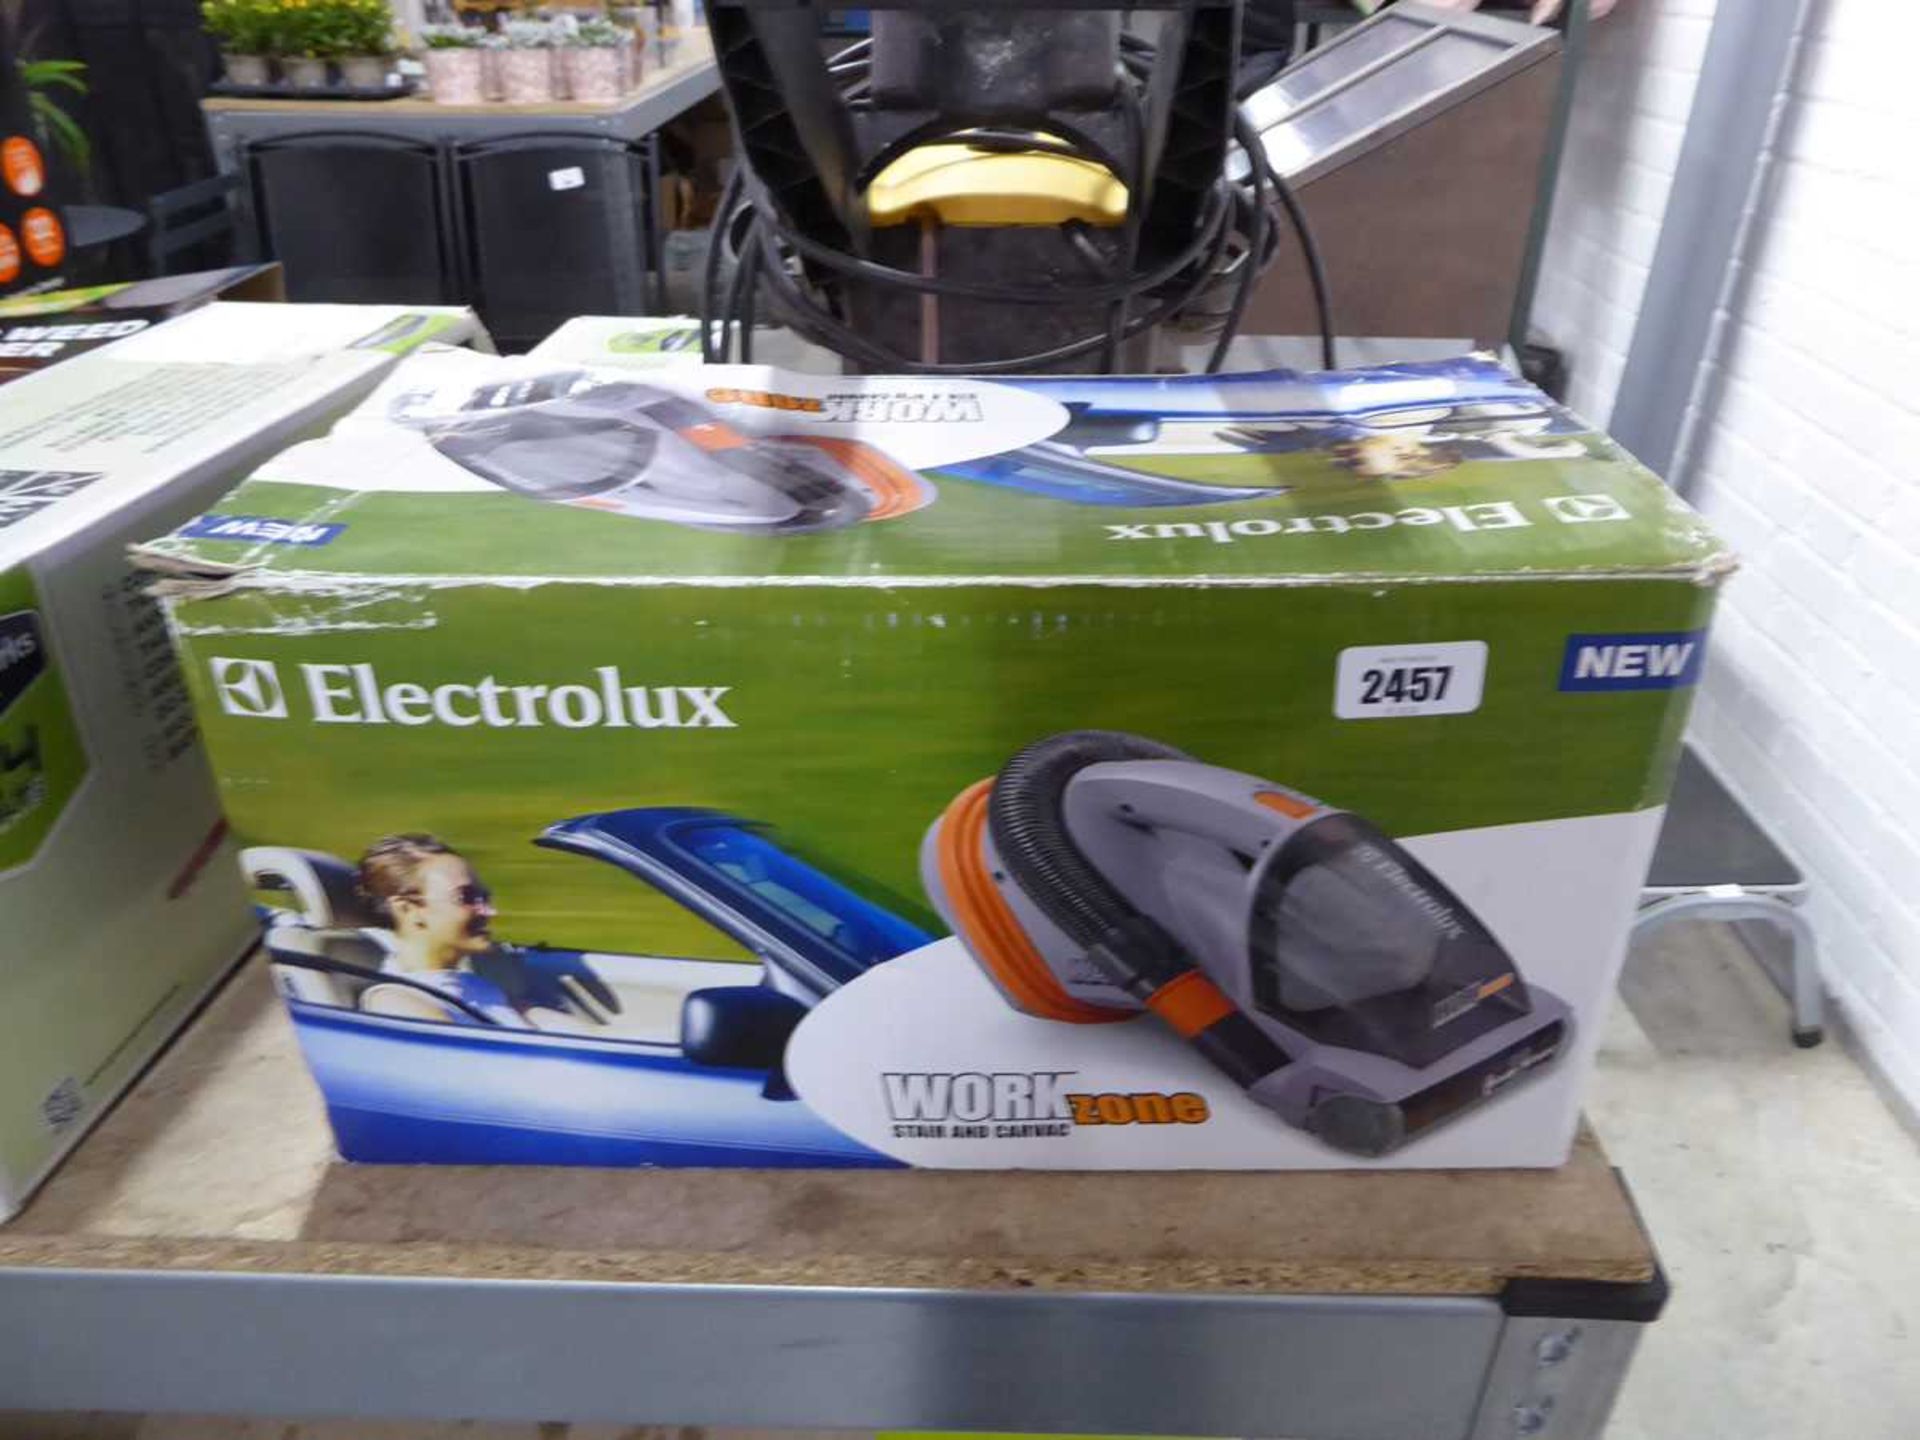 Electrolux Work Zone stair and car vacuum